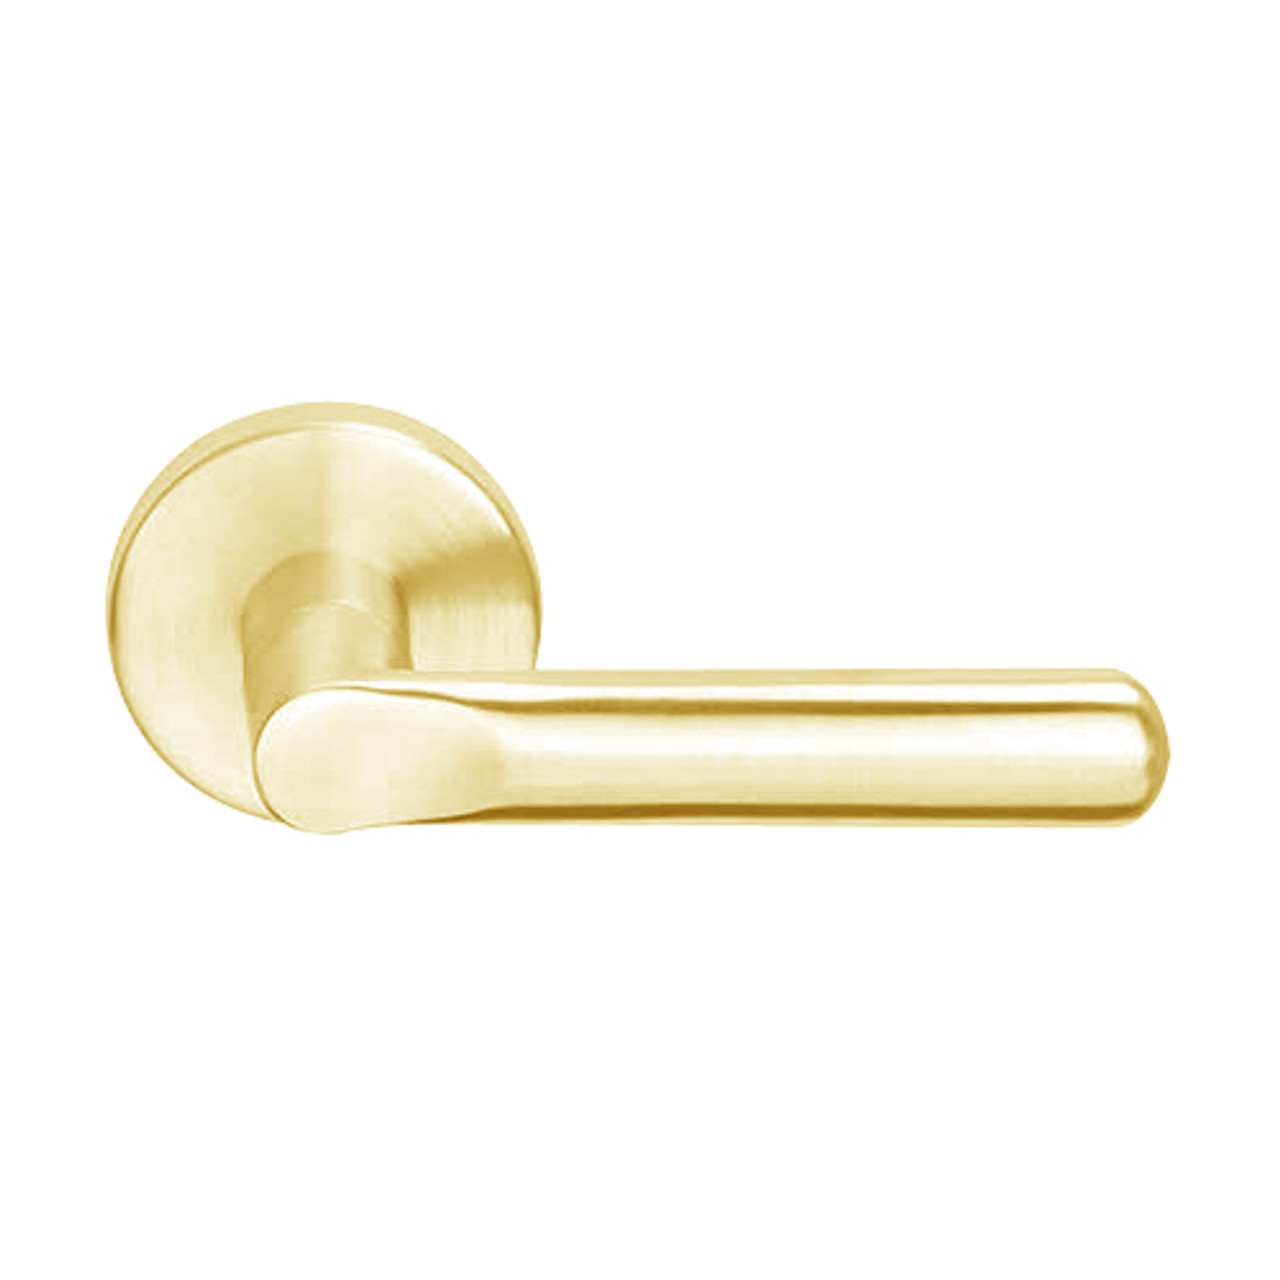 L9080BD-18A-605 Schlage L Series Storeroom Commercial Mortise Lock with 18 Cast Lever Design in Bright Brass